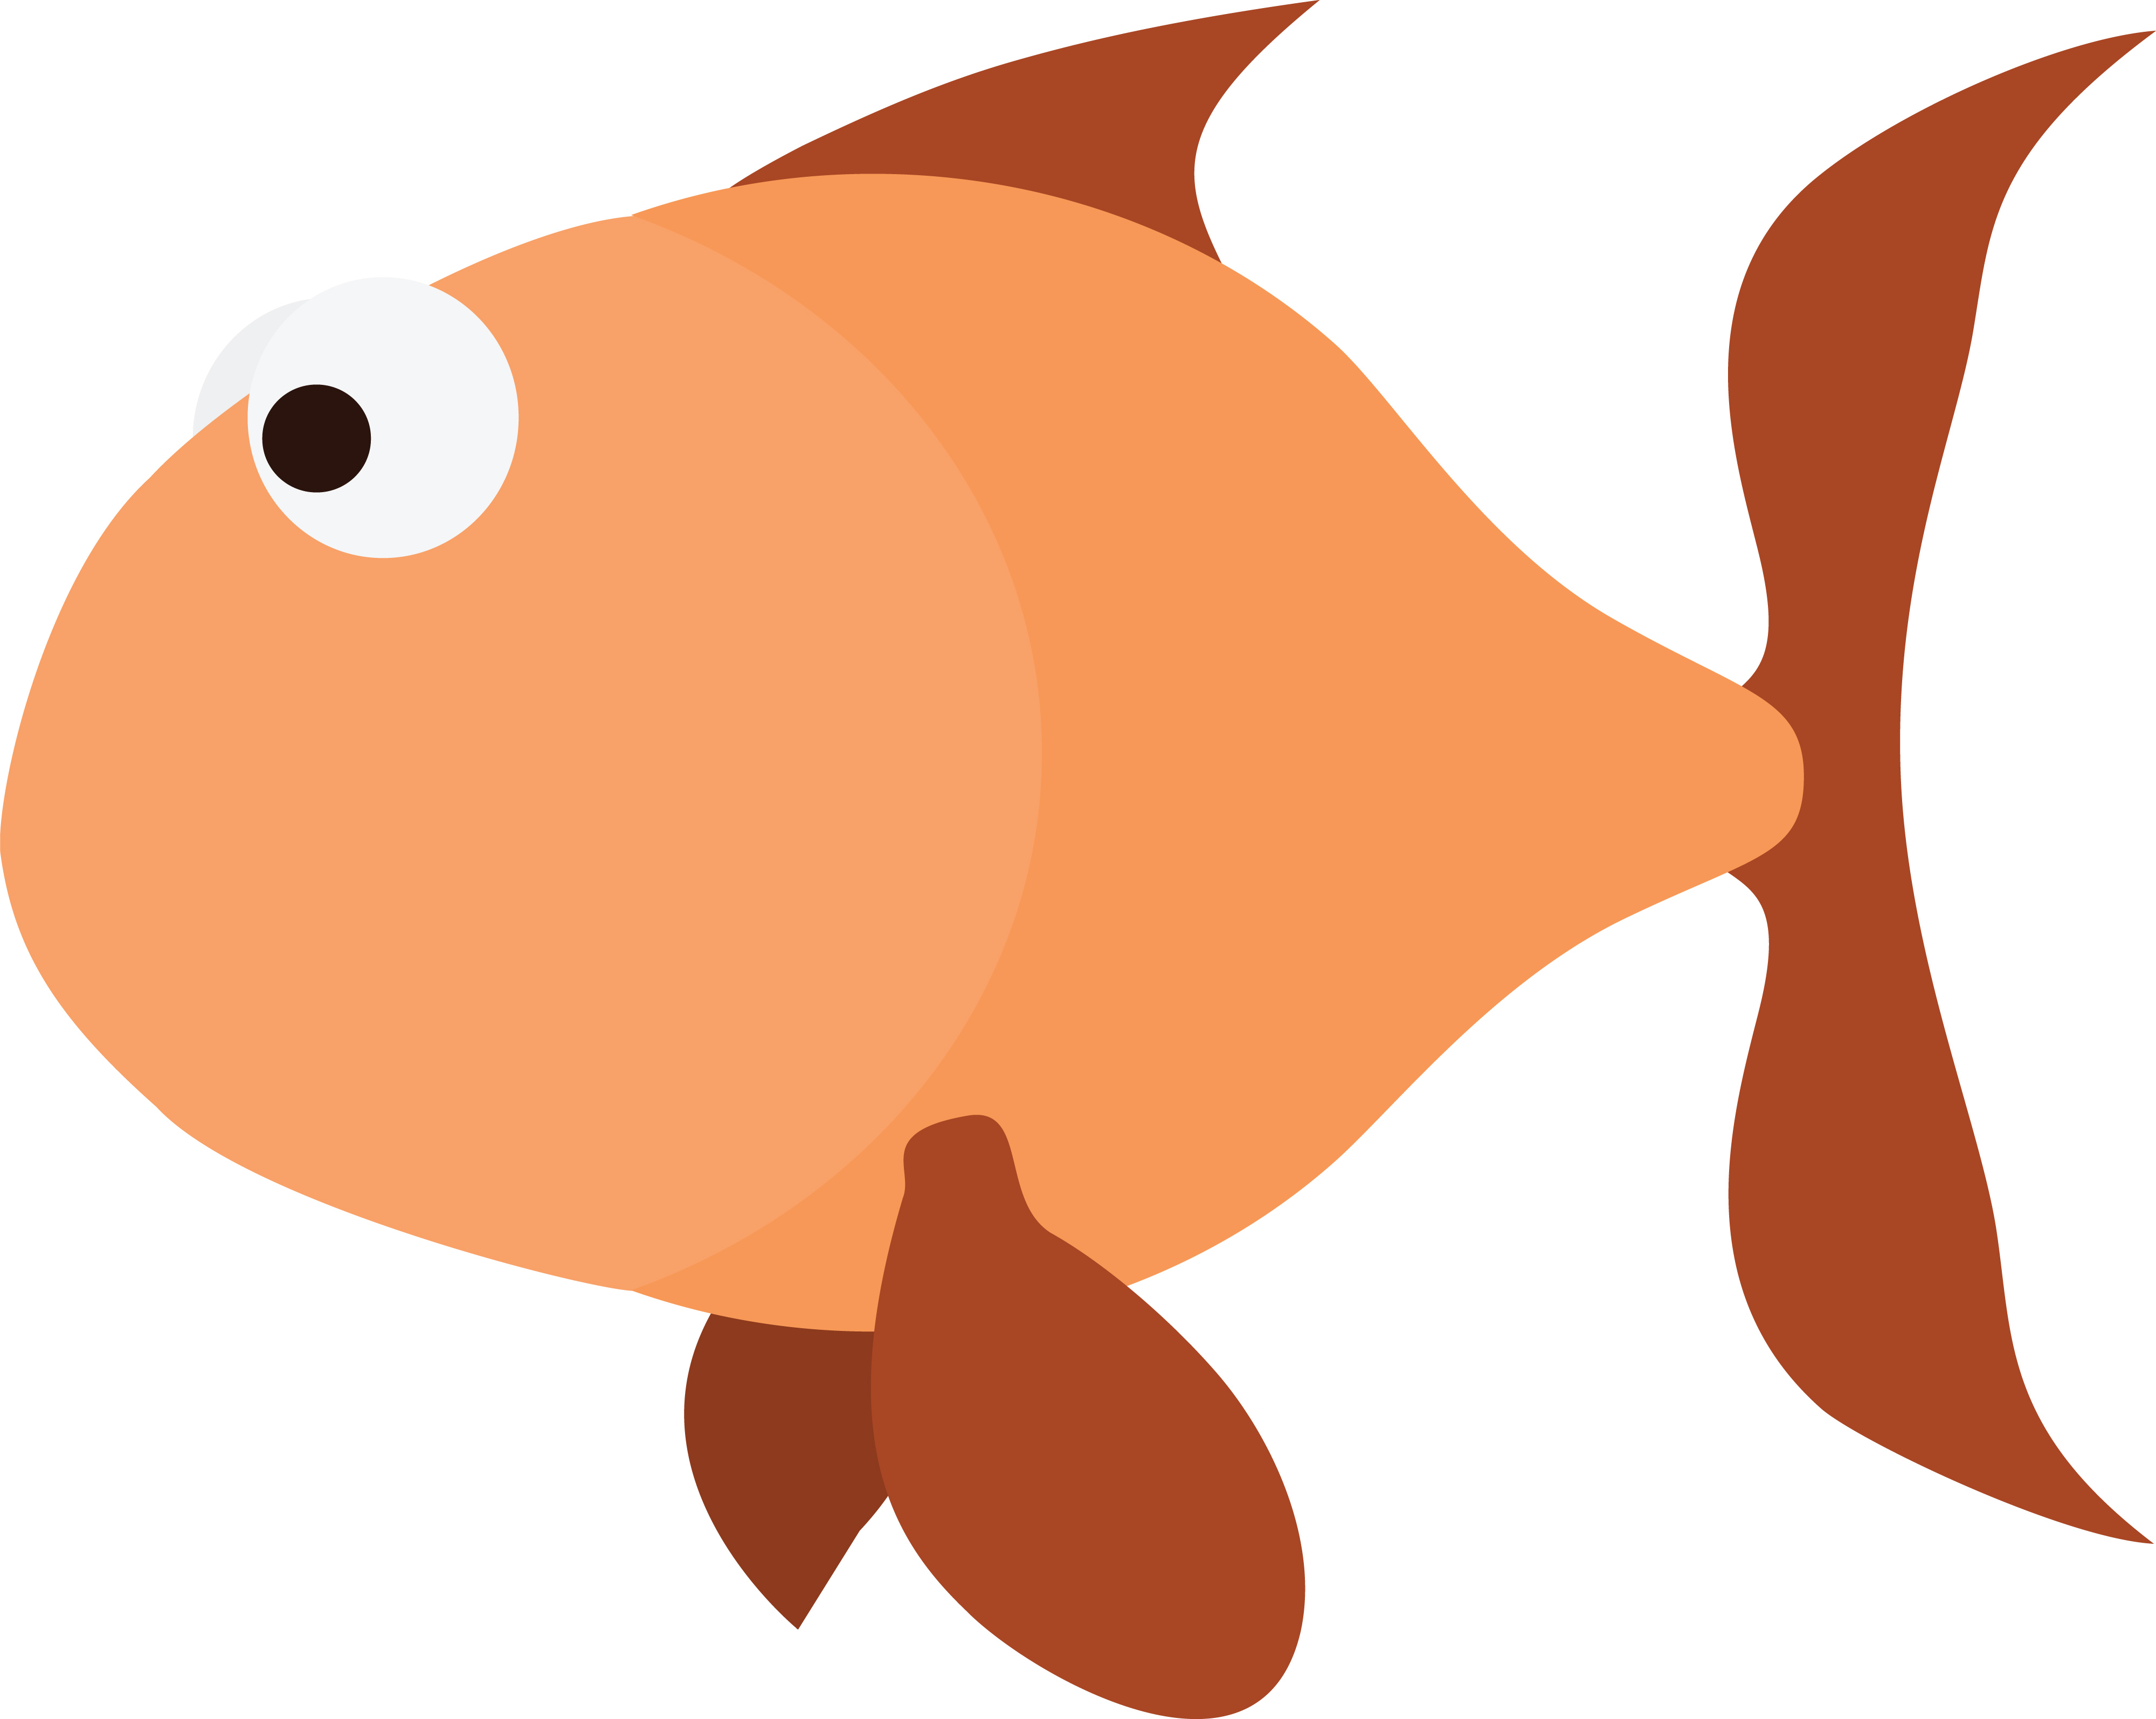 Free Clipart Of An orange fish